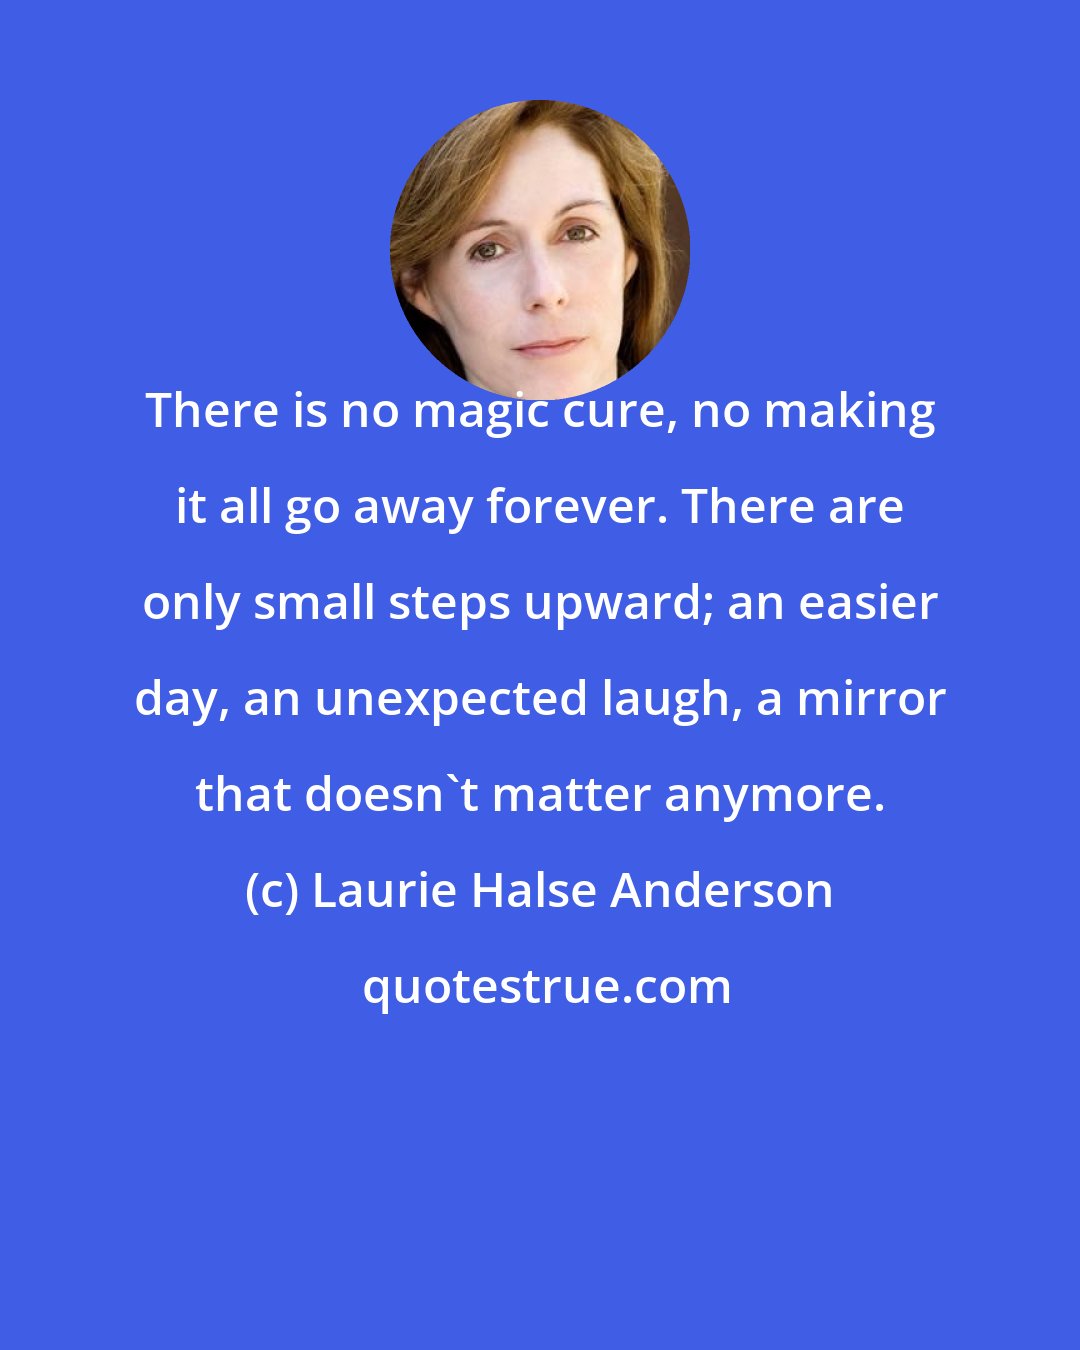 Laurie Halse Anderson: There is no magic cure, no making it all go away forever. There are only small steps upward; an easier day, an unexpected laugh, a mirror that doesn't matter anymore.